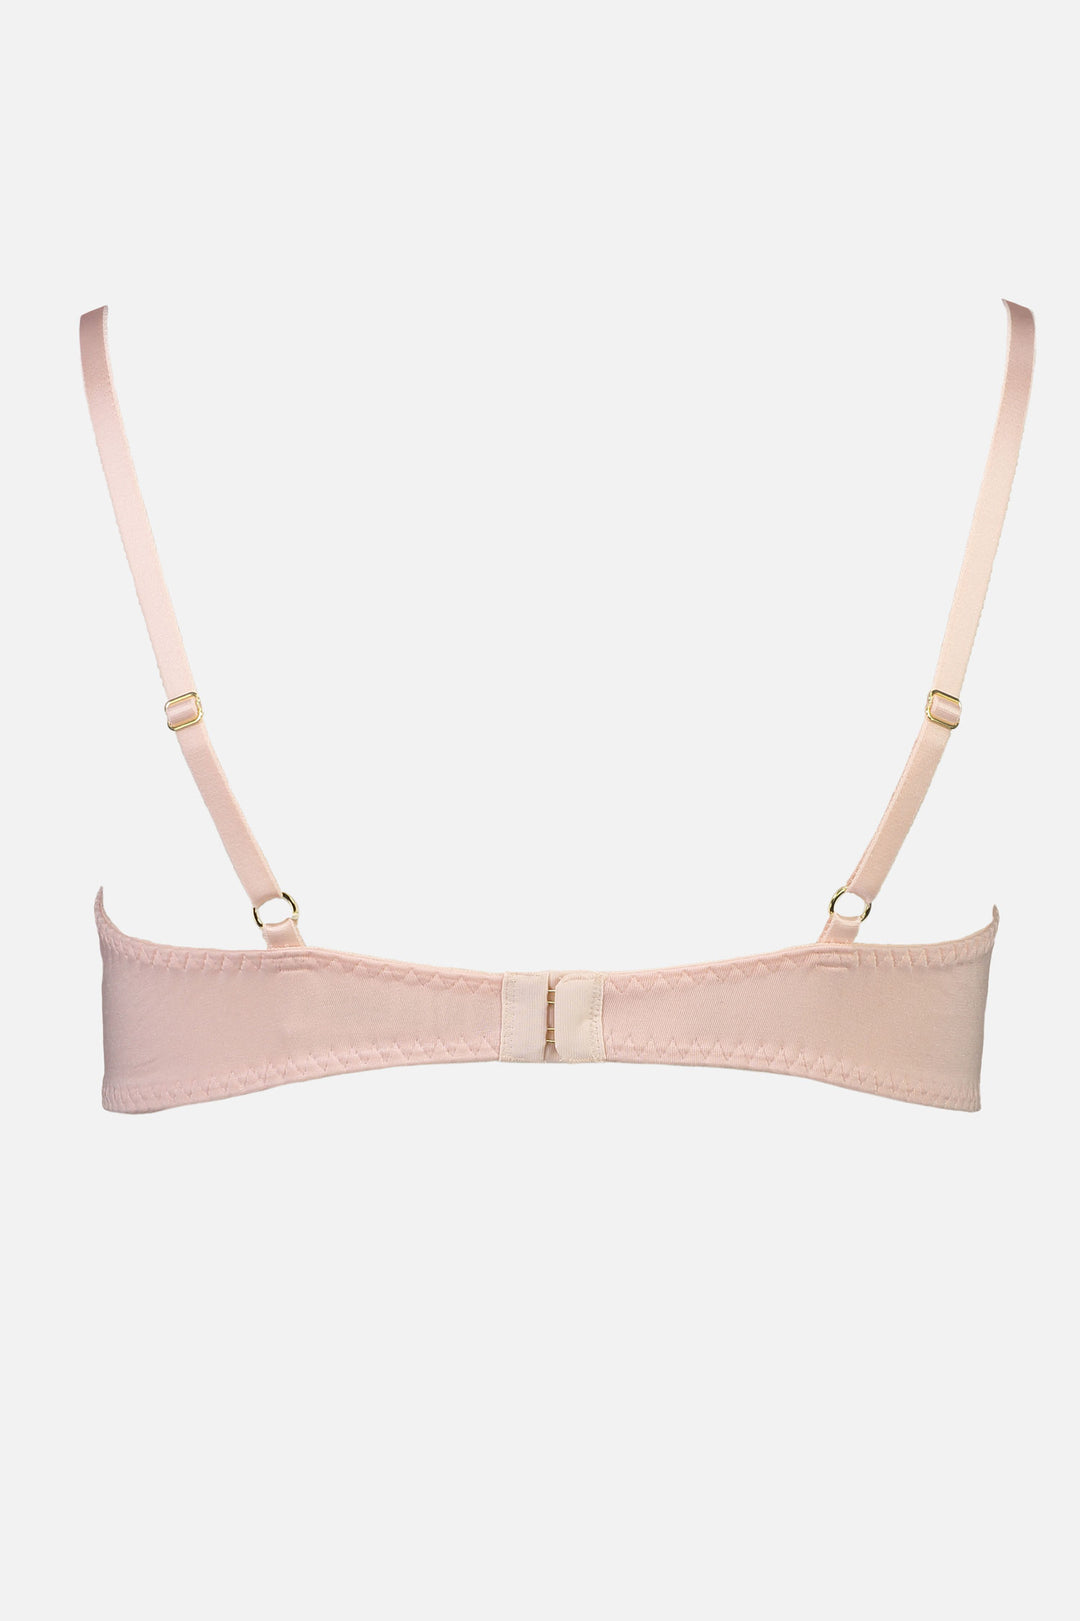 Videris Lingerie Maggie wire free soft cup bra in pale pink TENCEL™ with adjustable back straps and hook and eyes closure